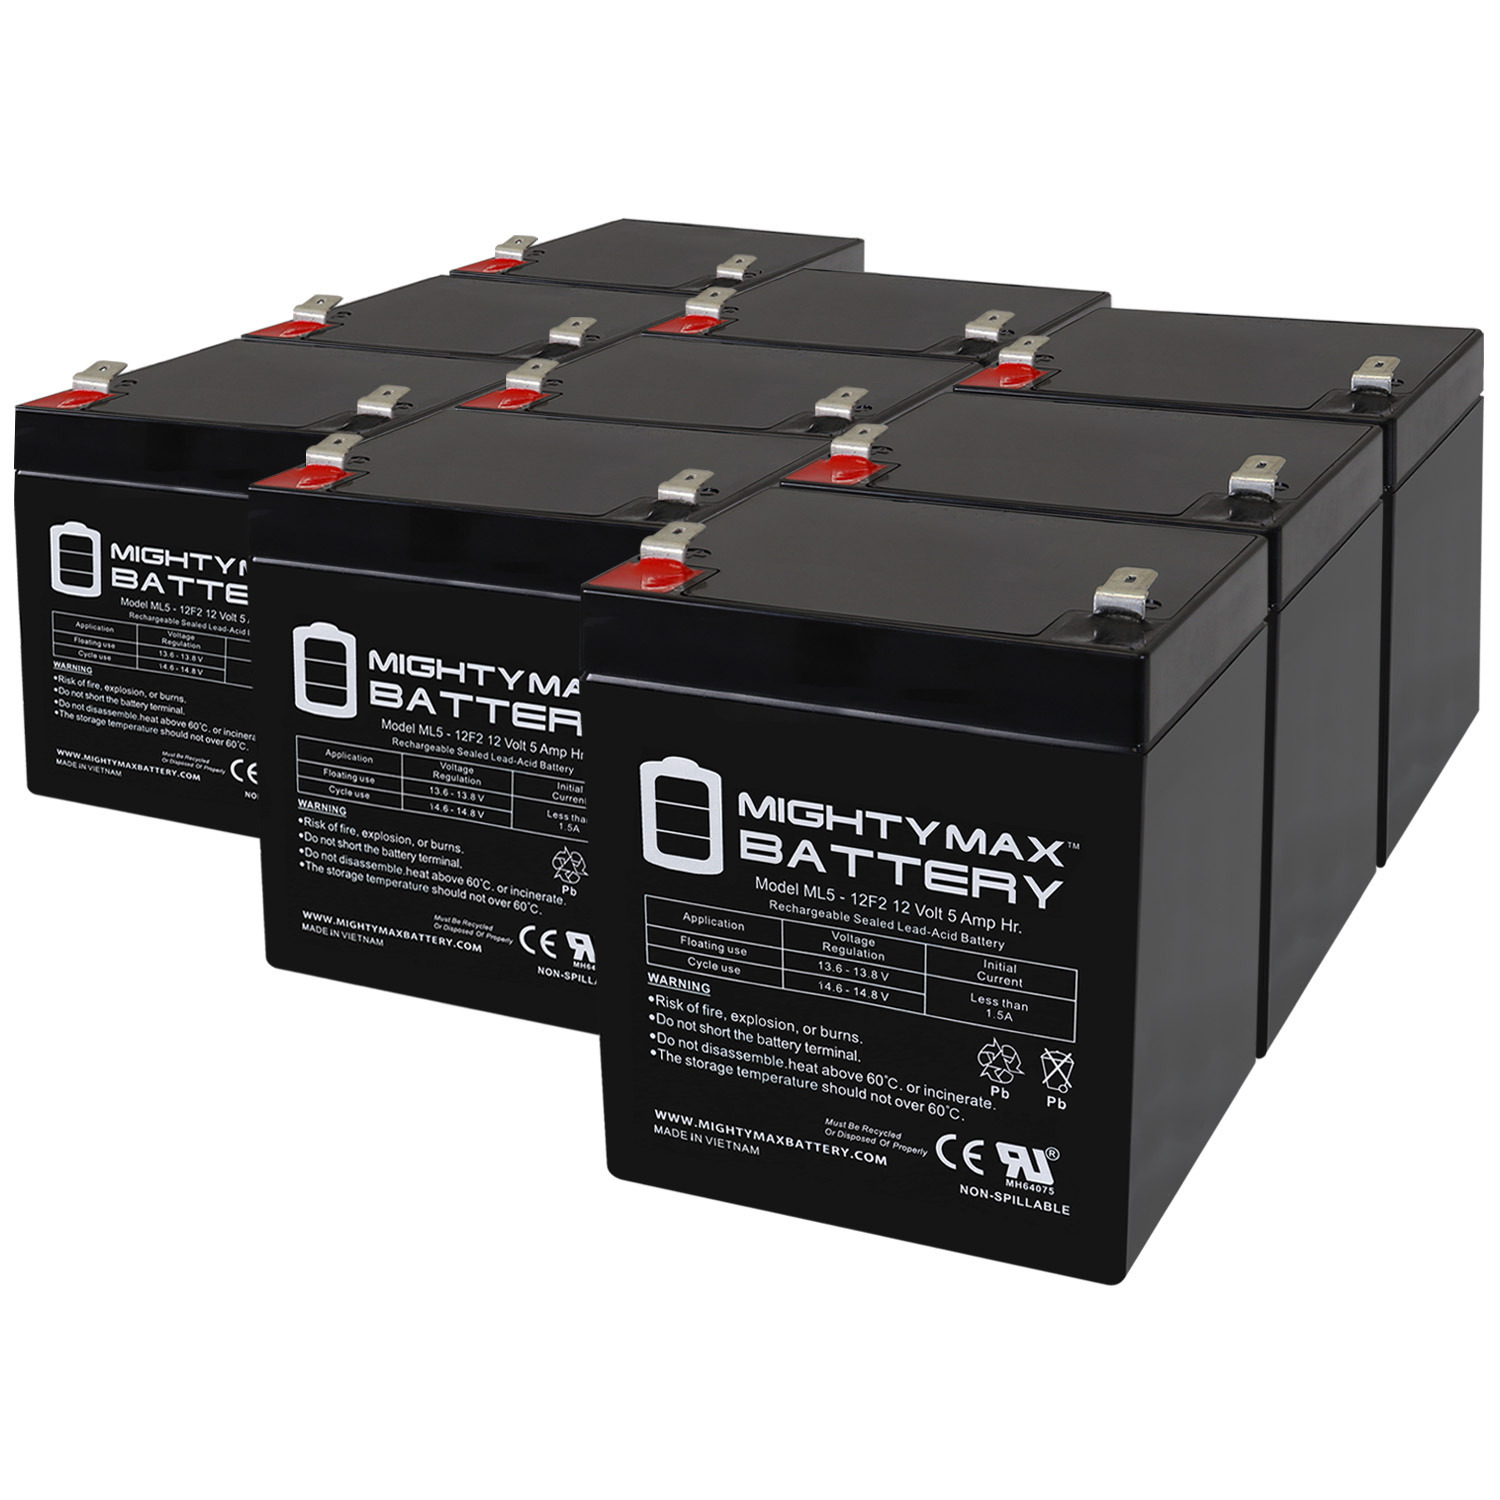 12V 5Ah F2 SLA Replacement Battery for Fiat 500 #IGOR0070US - 9 Pack